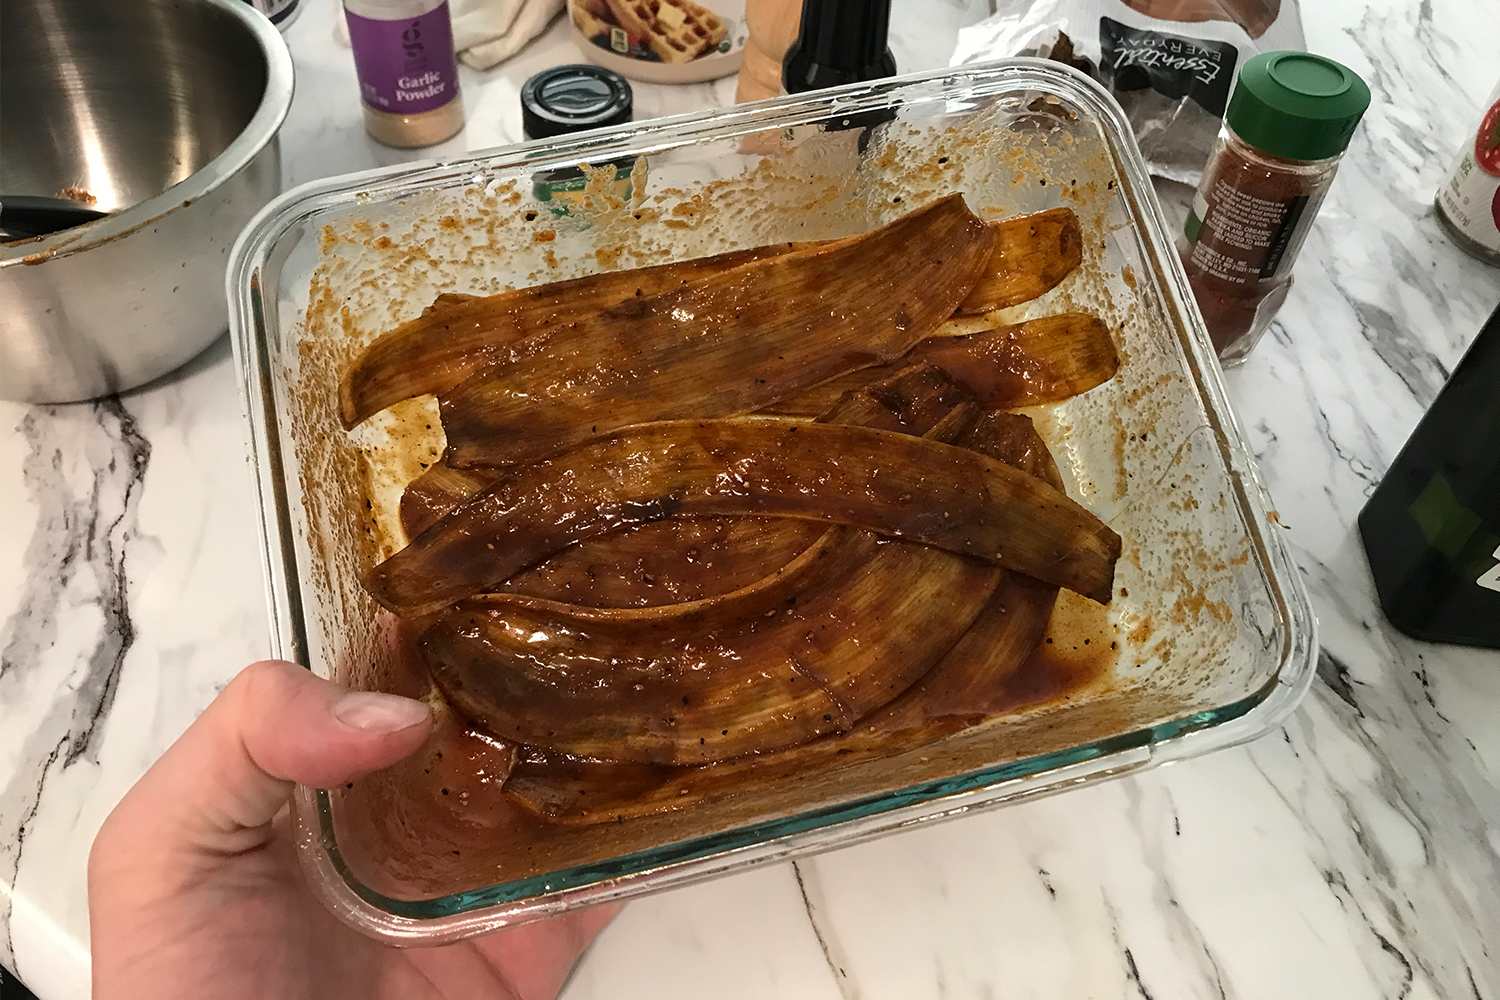 A glass container with marinated banana peels that will be made into banana peel bacon. We talk about how to make the recipe.